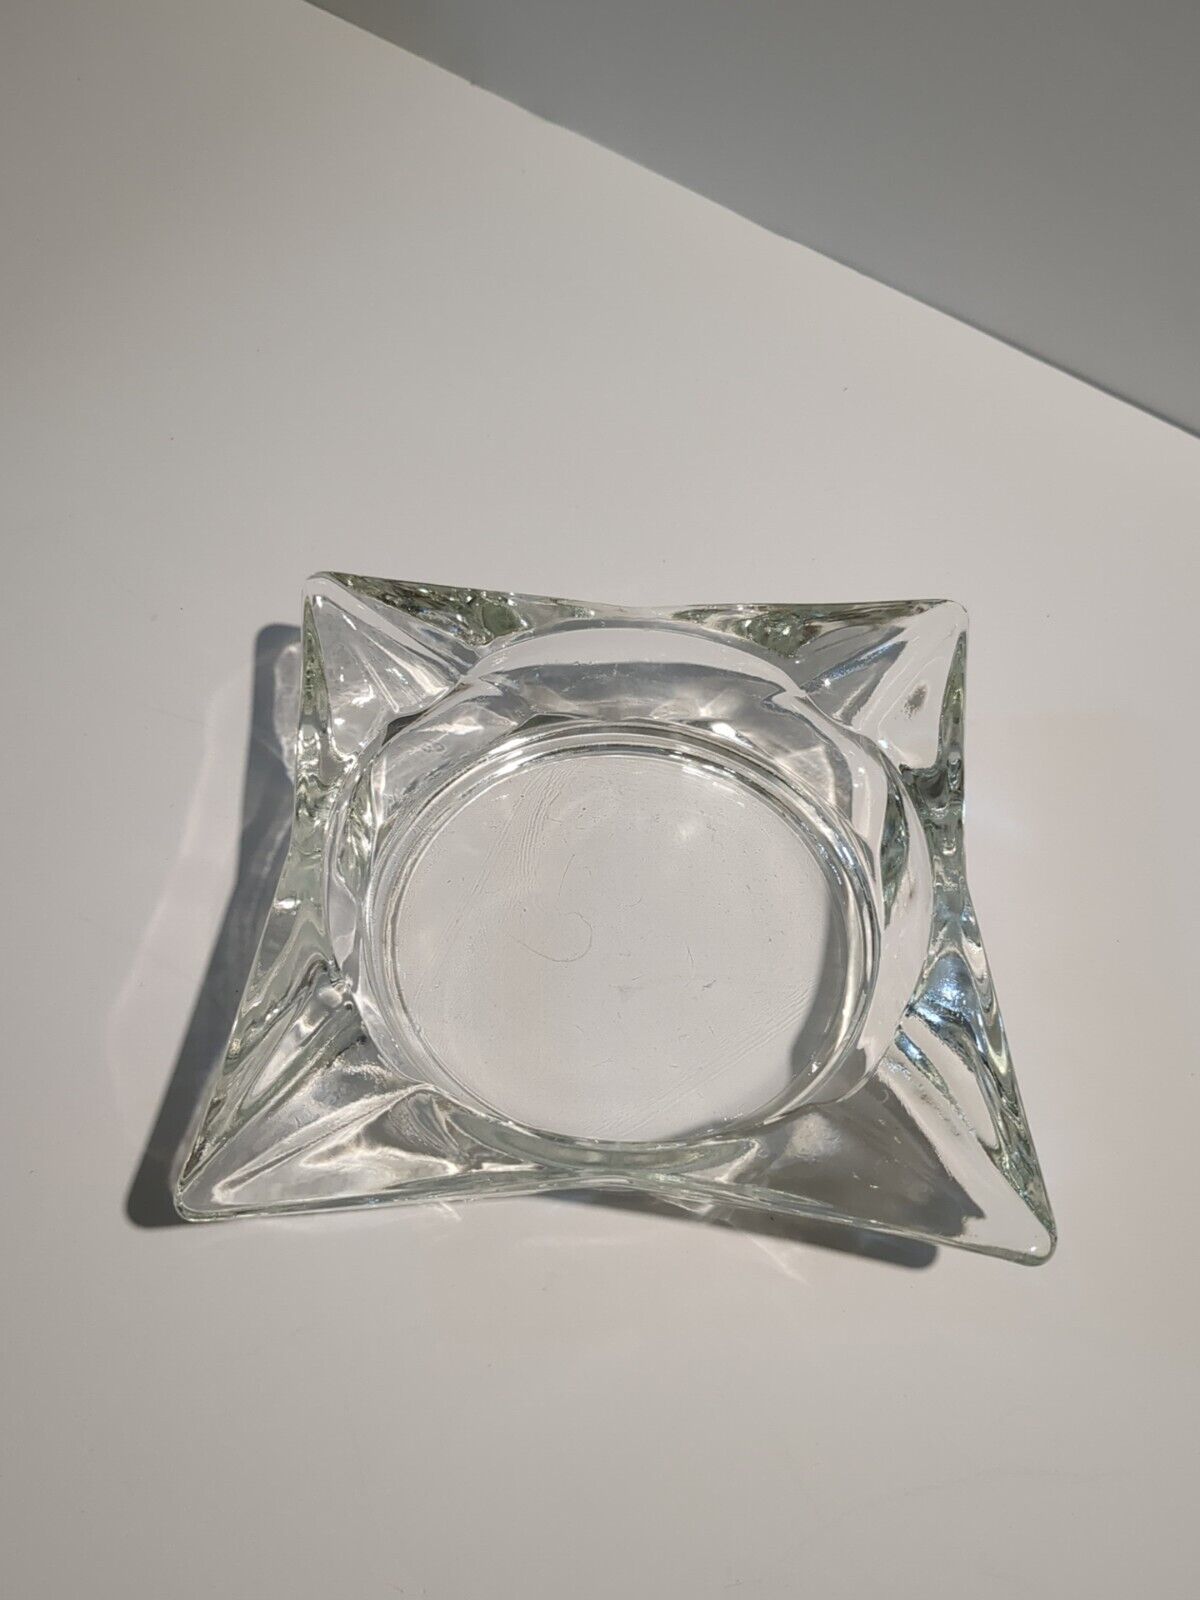 Vintage Large Heavy Square Clear Glass Cigar or Cigarette Ash Tray Star Shaped